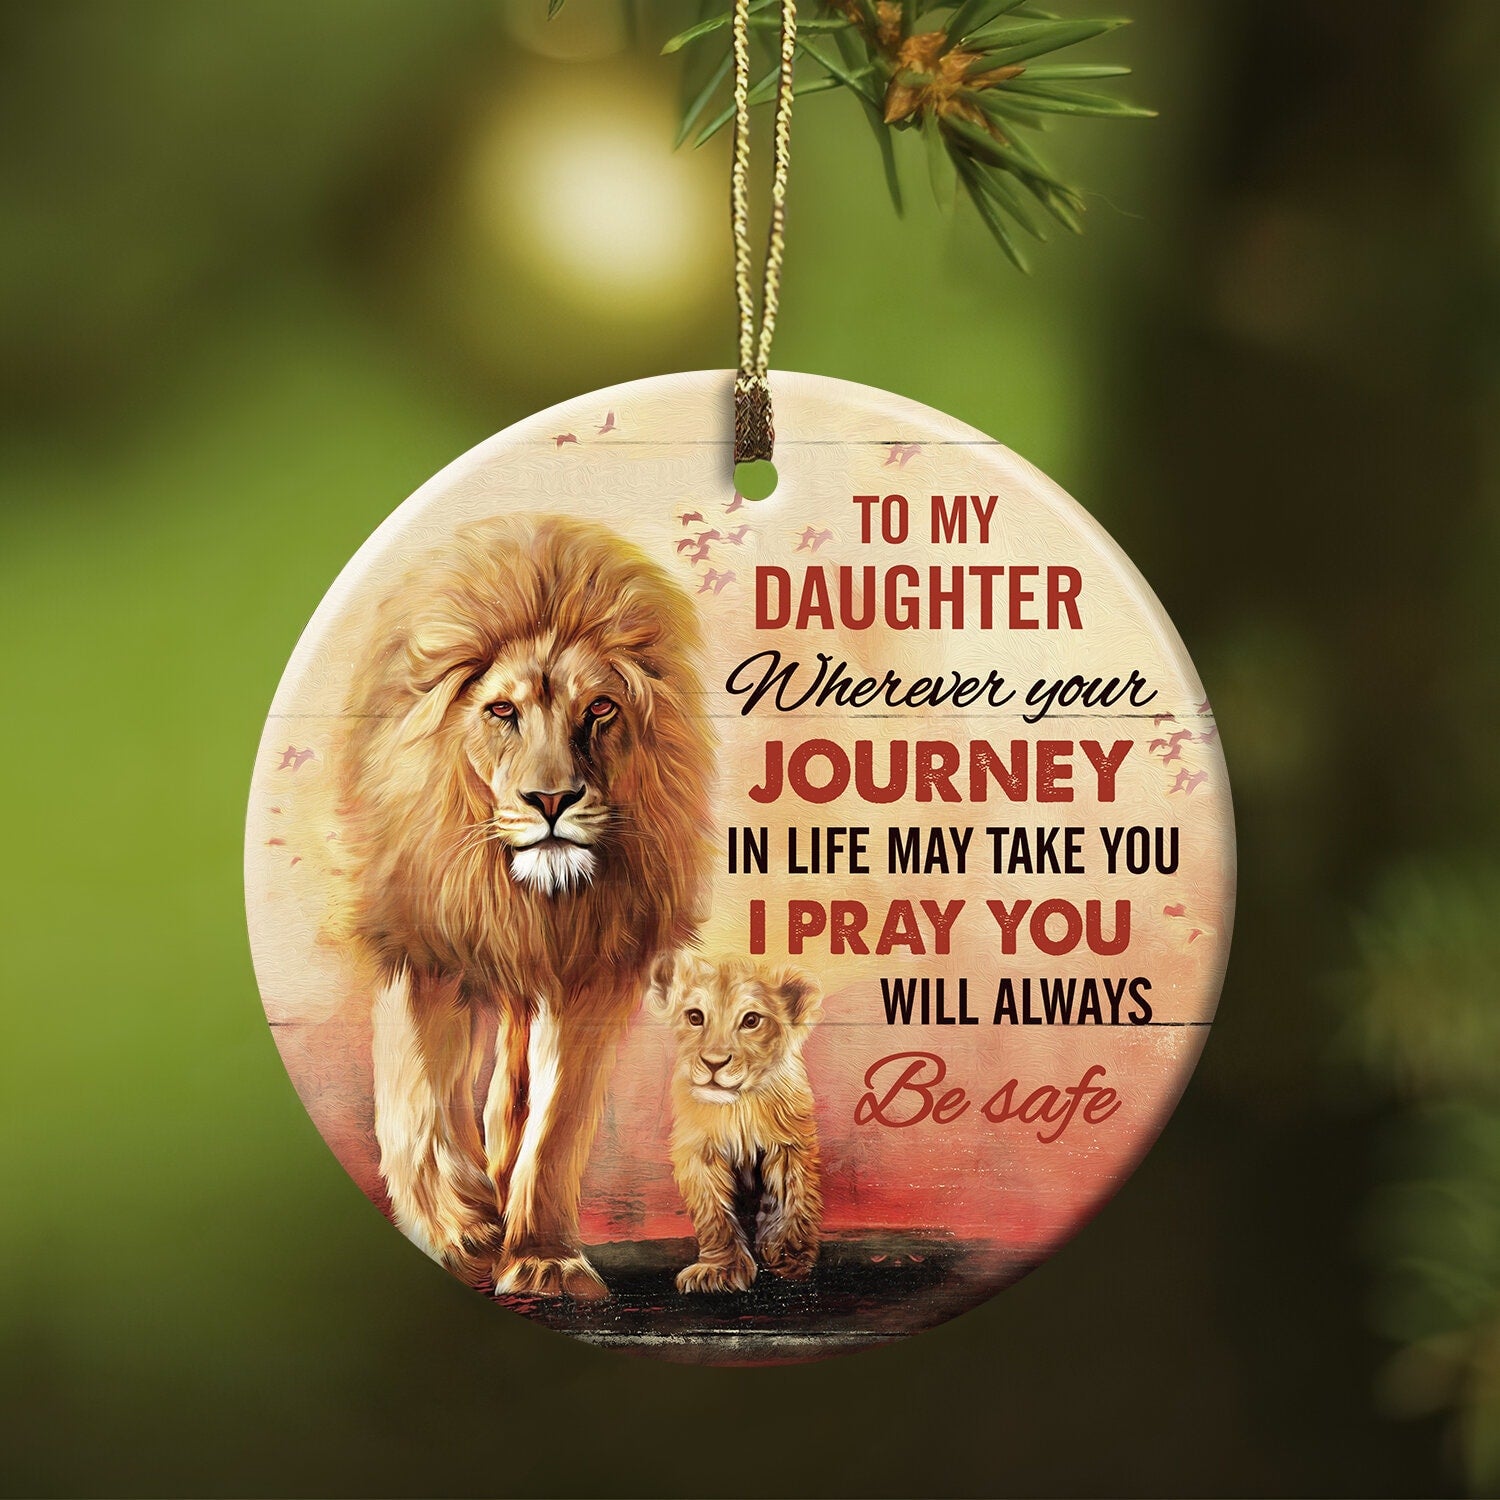 To my daughter - Lion - I pray you will always be safe - Circle Ceramic Ornament